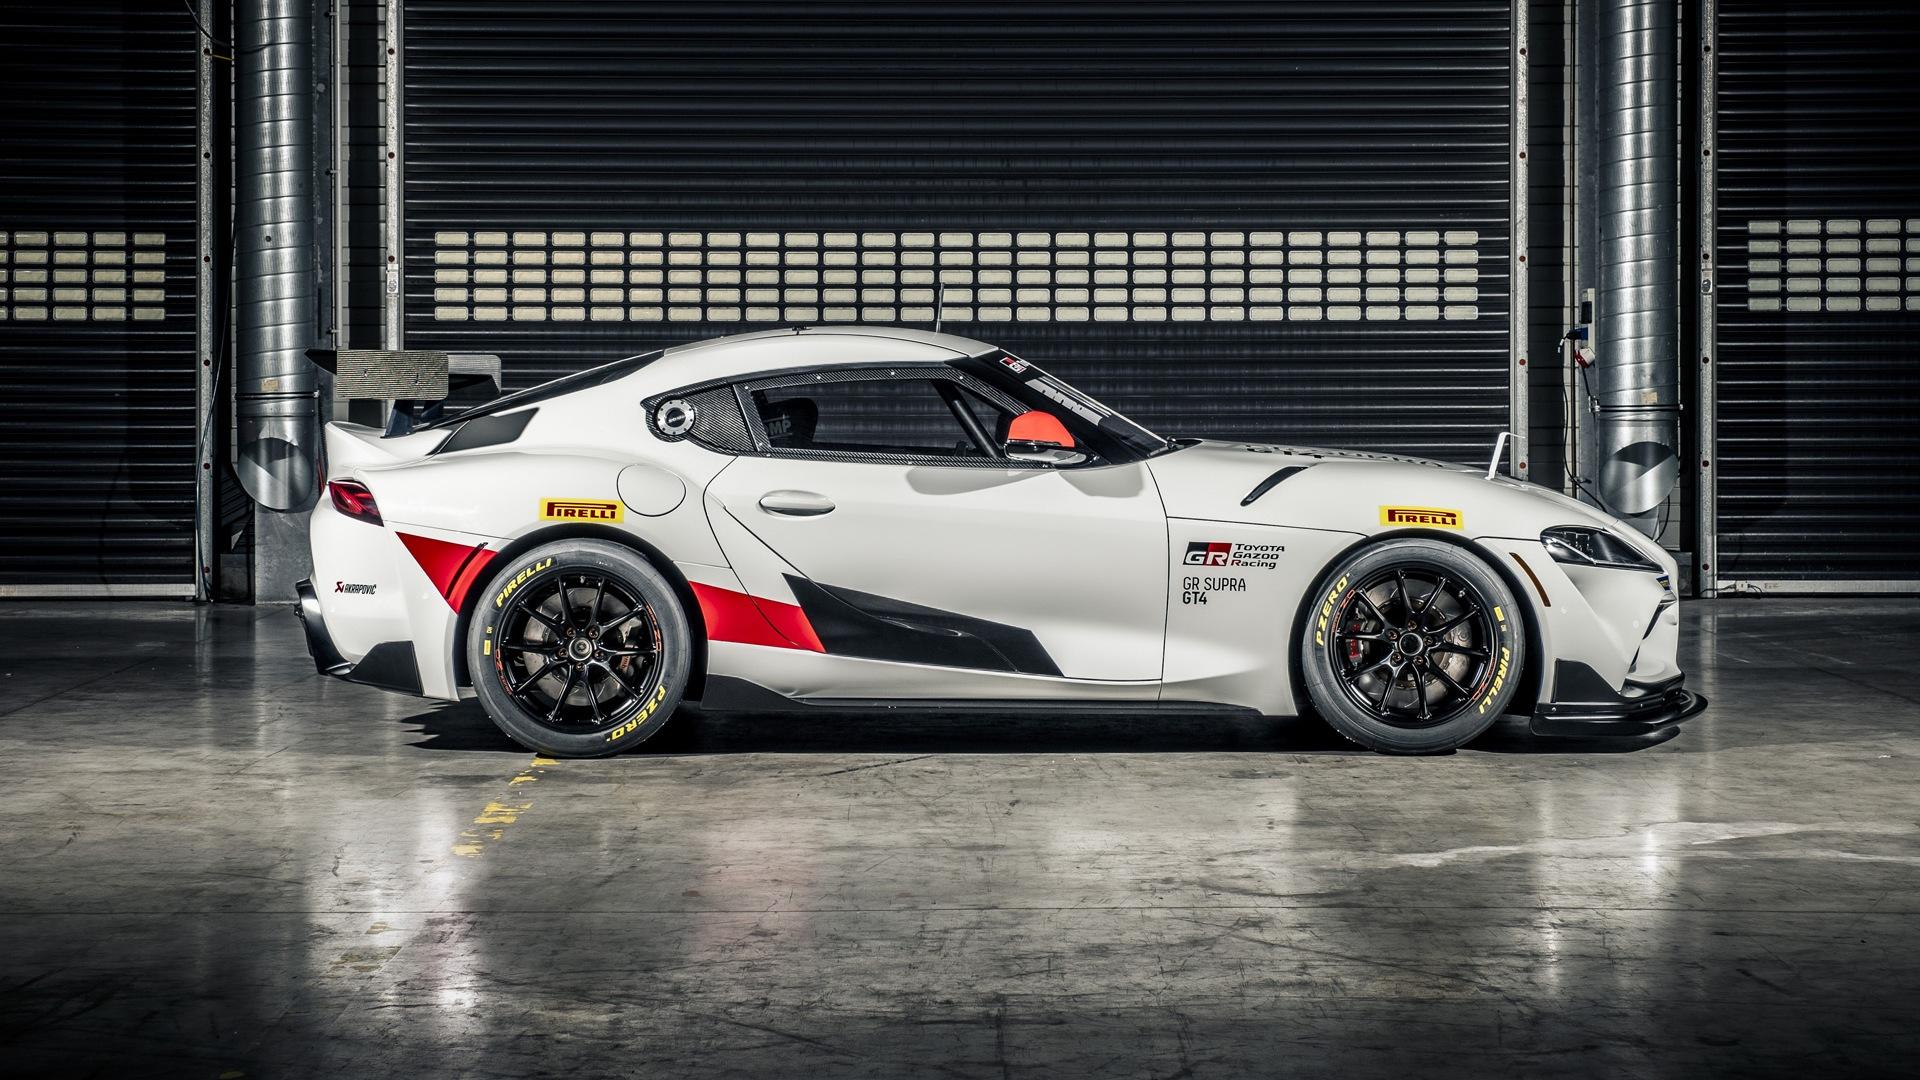 Toyota Supra GT4 customer race car launches in 2020